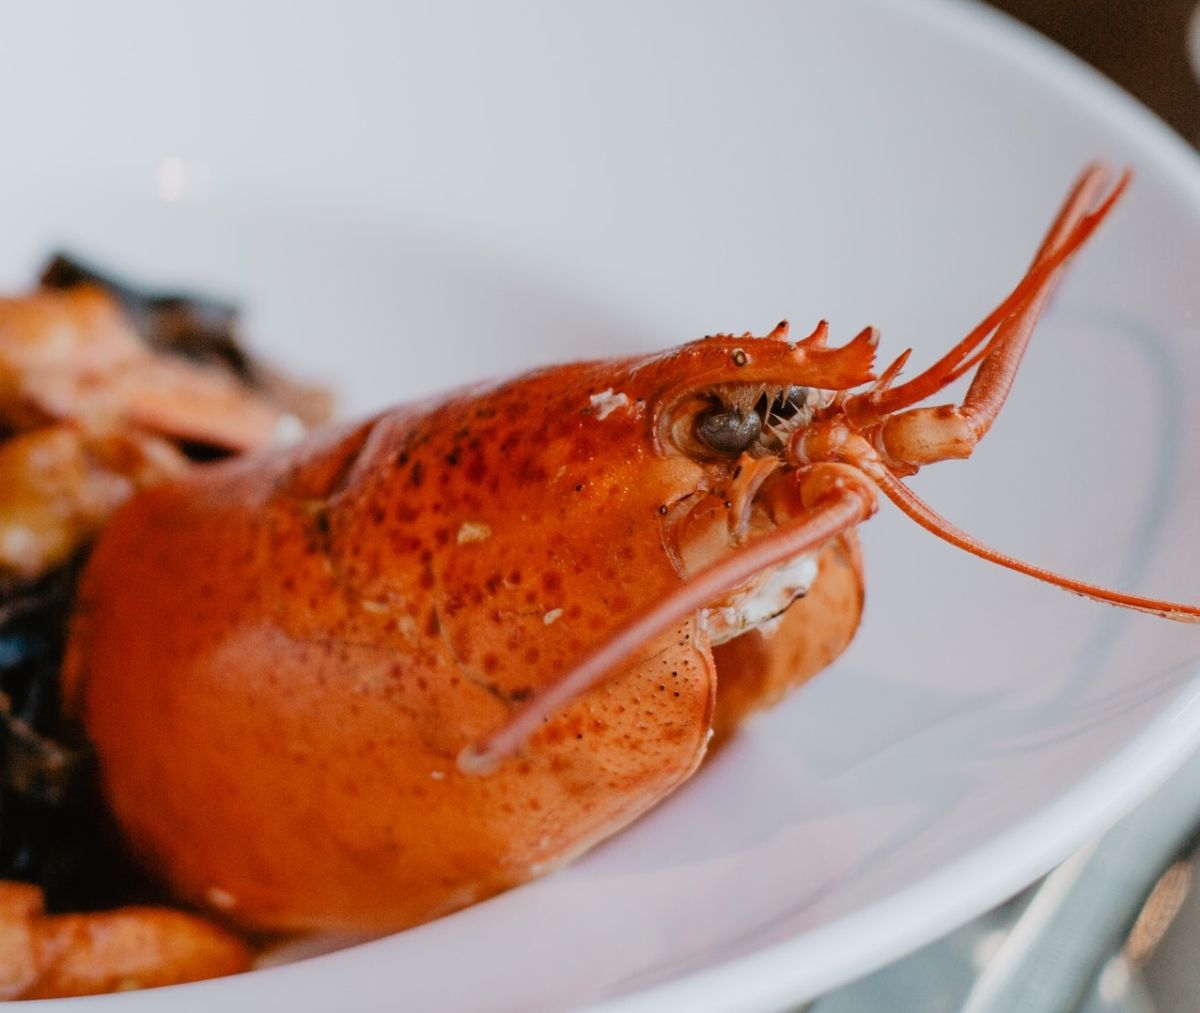 Seafood Store Offers a Montecito Lobster Roll Kit for “Only” $ 1,000